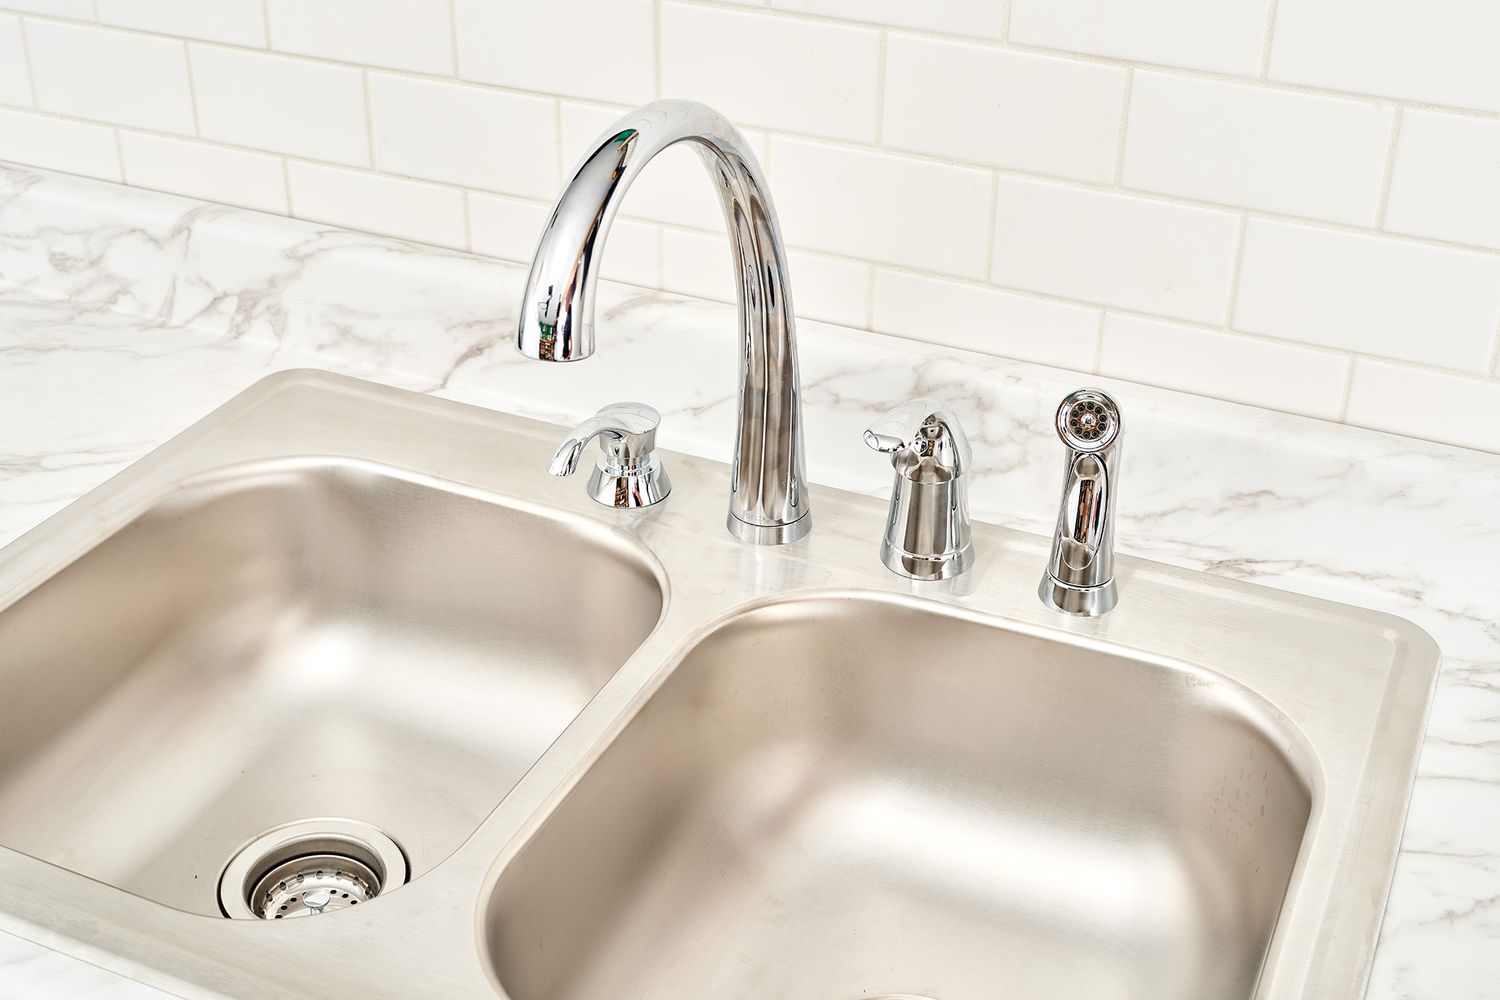 How To Repair Delta Kitchen Faucet